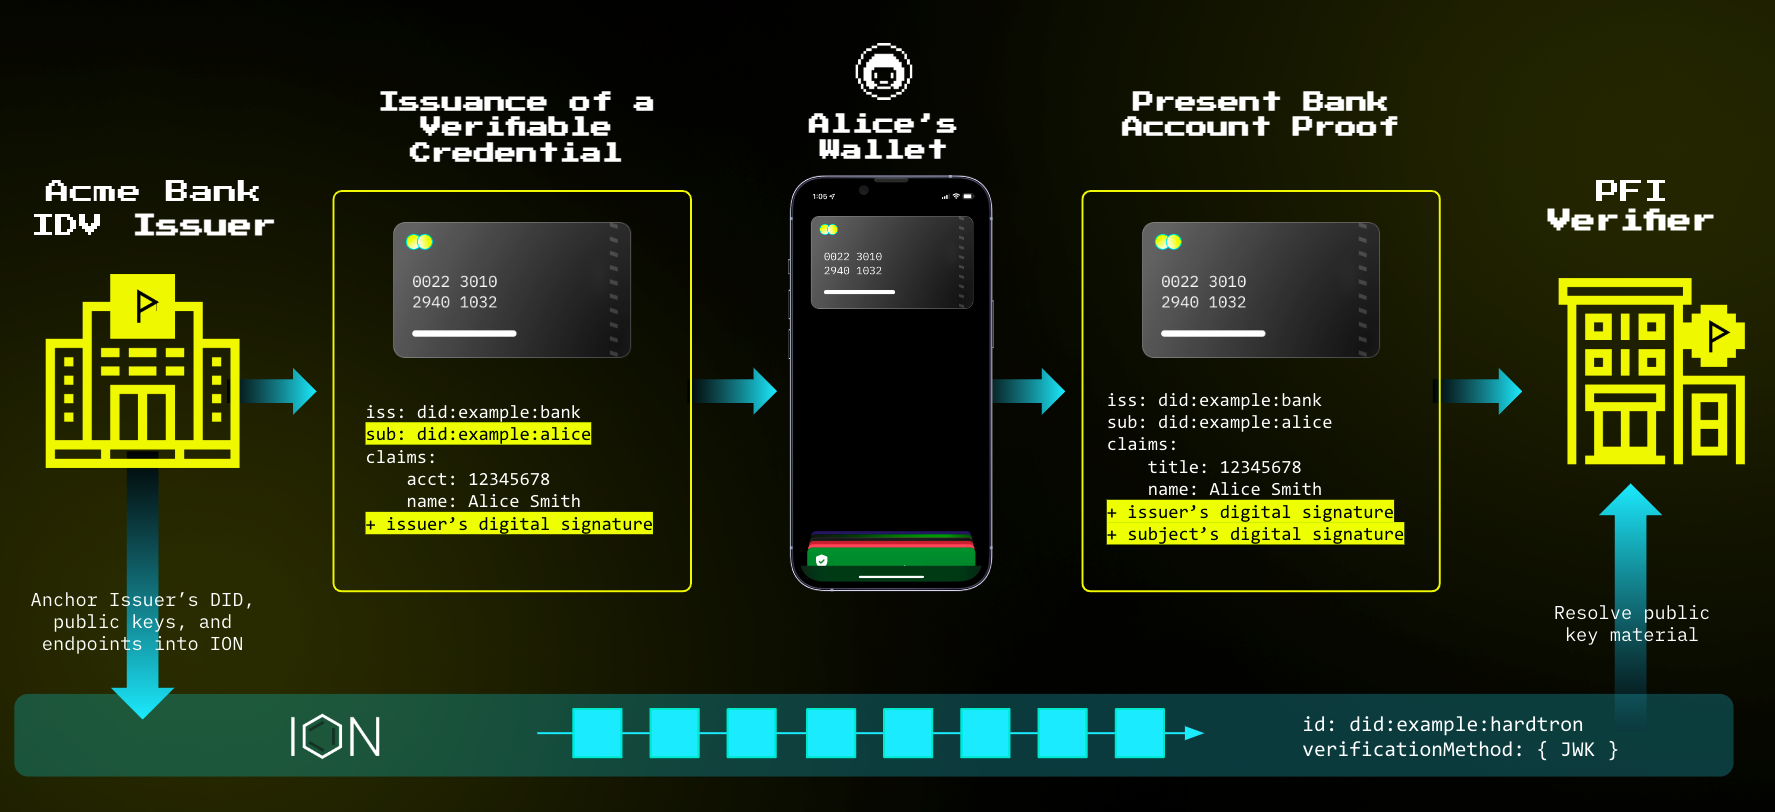 Illustration of Acme Bank issuing a verifiable credential to Alice’s wallet, and the wallet presenting the credential as proof of a bank account to a PFI Verifier.